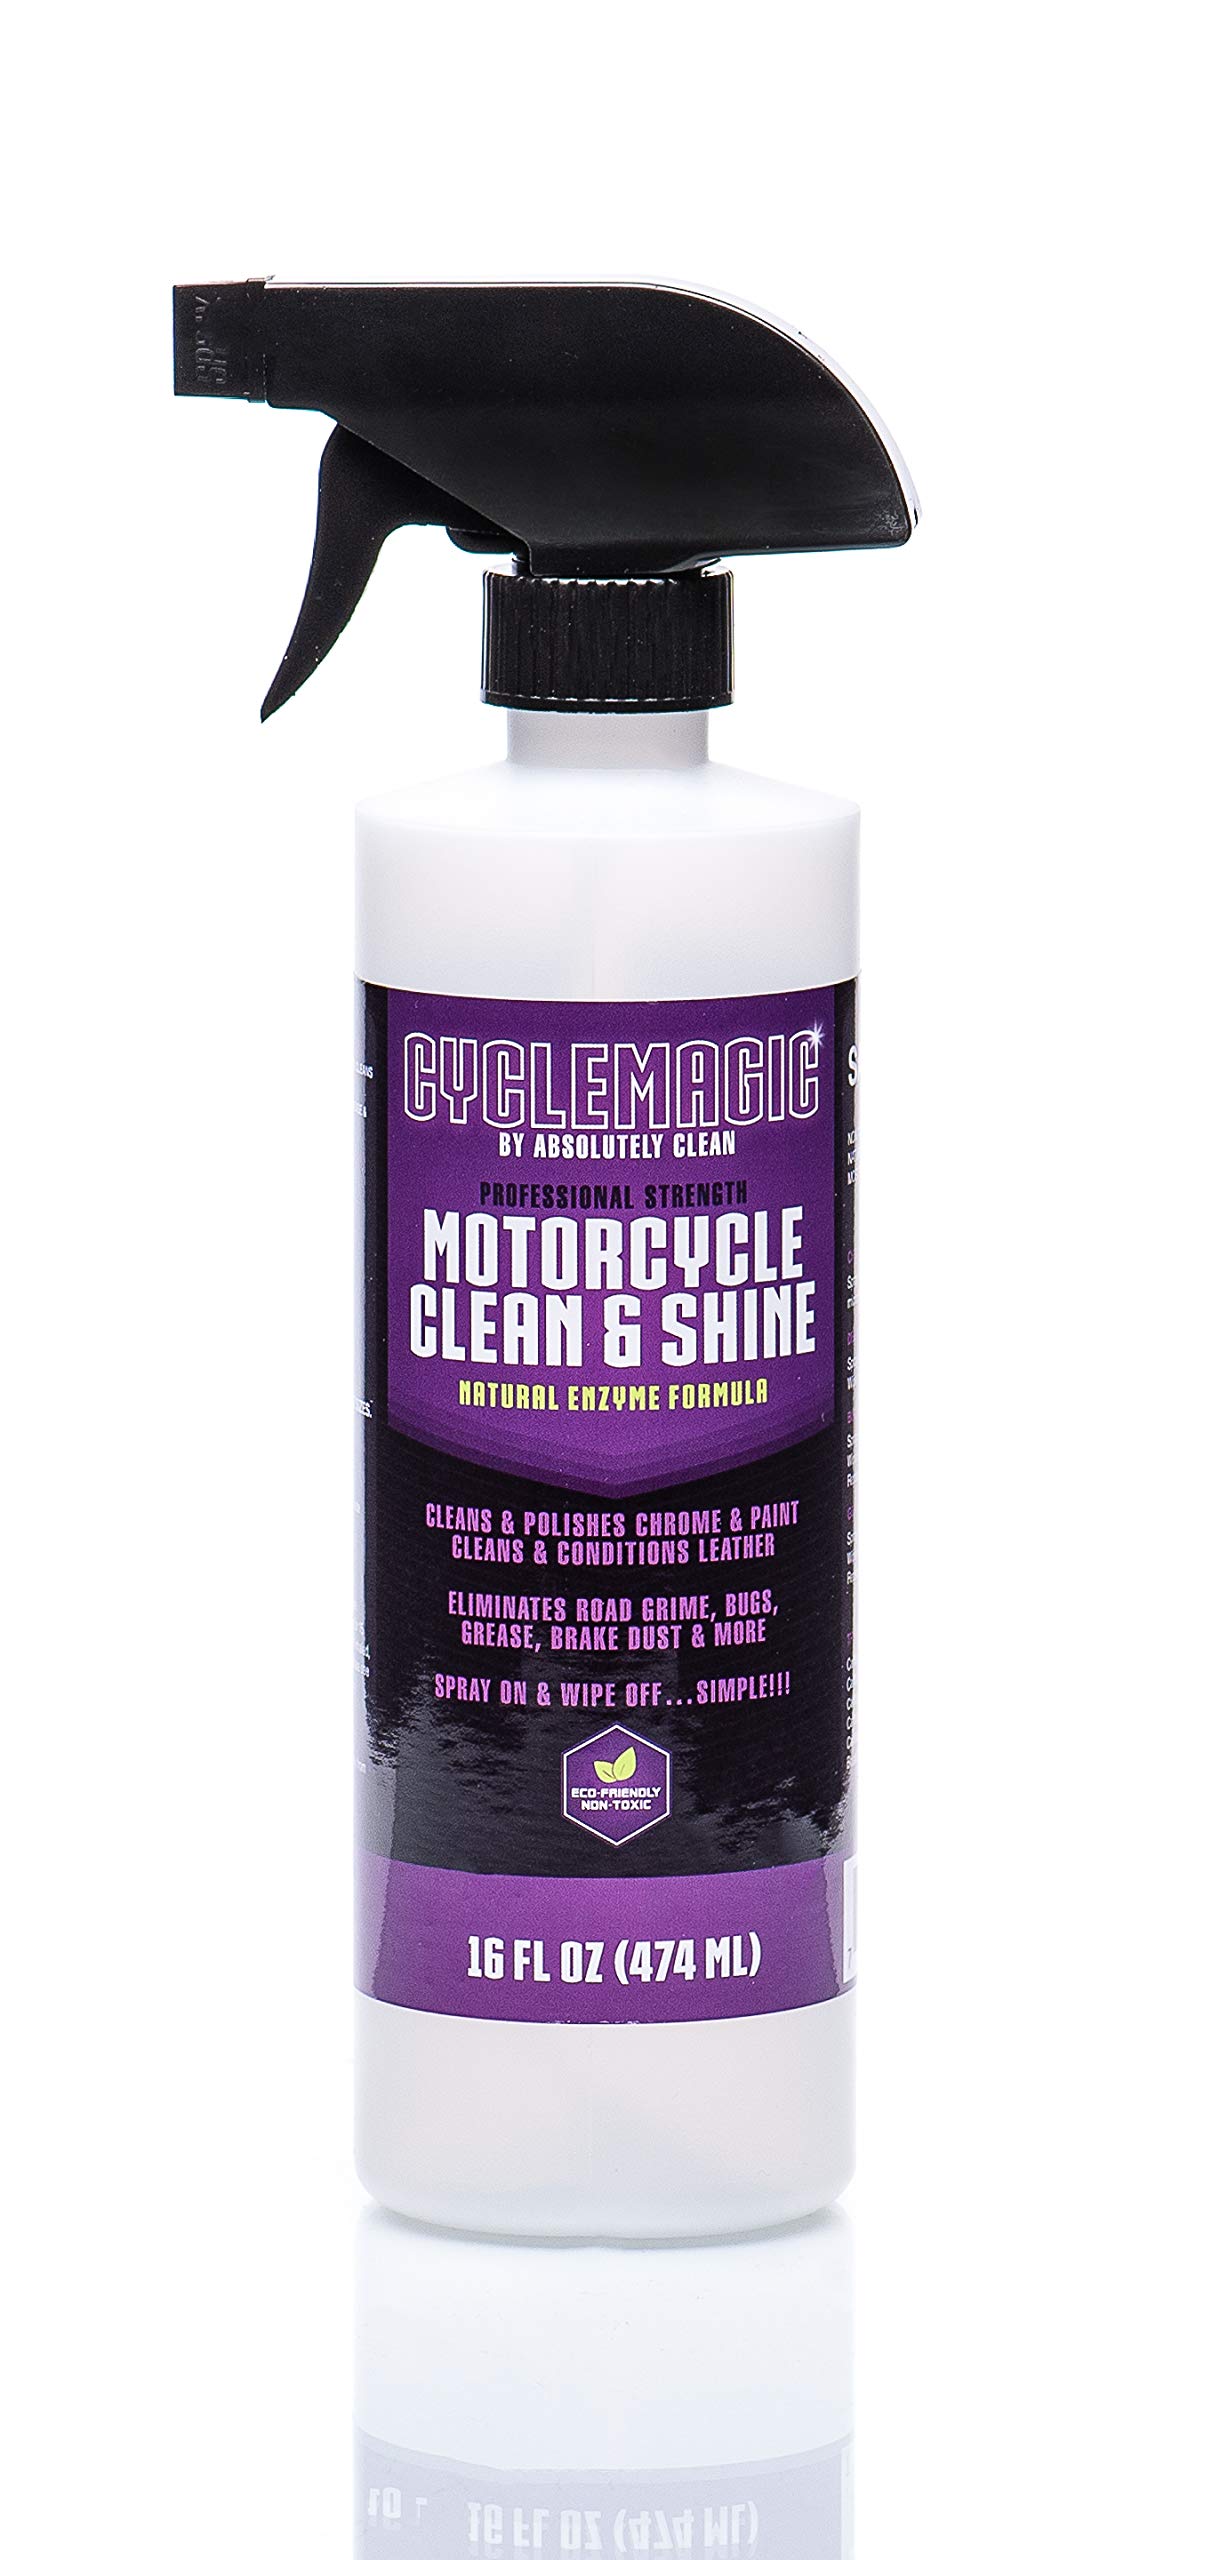 CycleMagic Motorcycle Clean and Shine - Motorcycle Cleaner